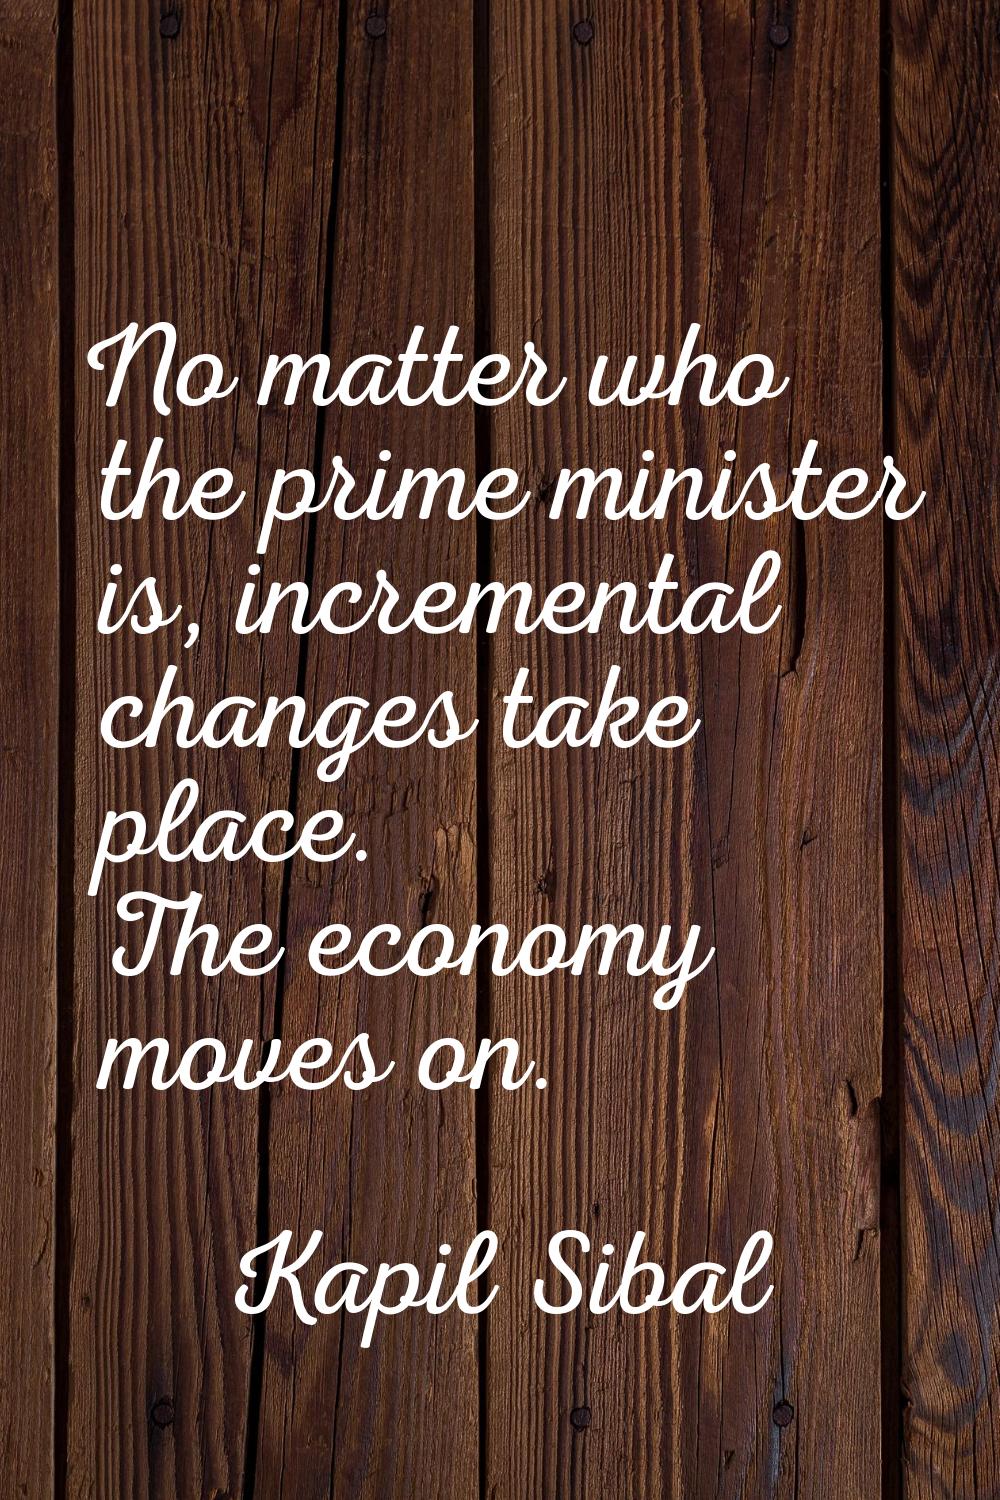 No matter who the prime minister is, incremental changes take place. The economy moves on.